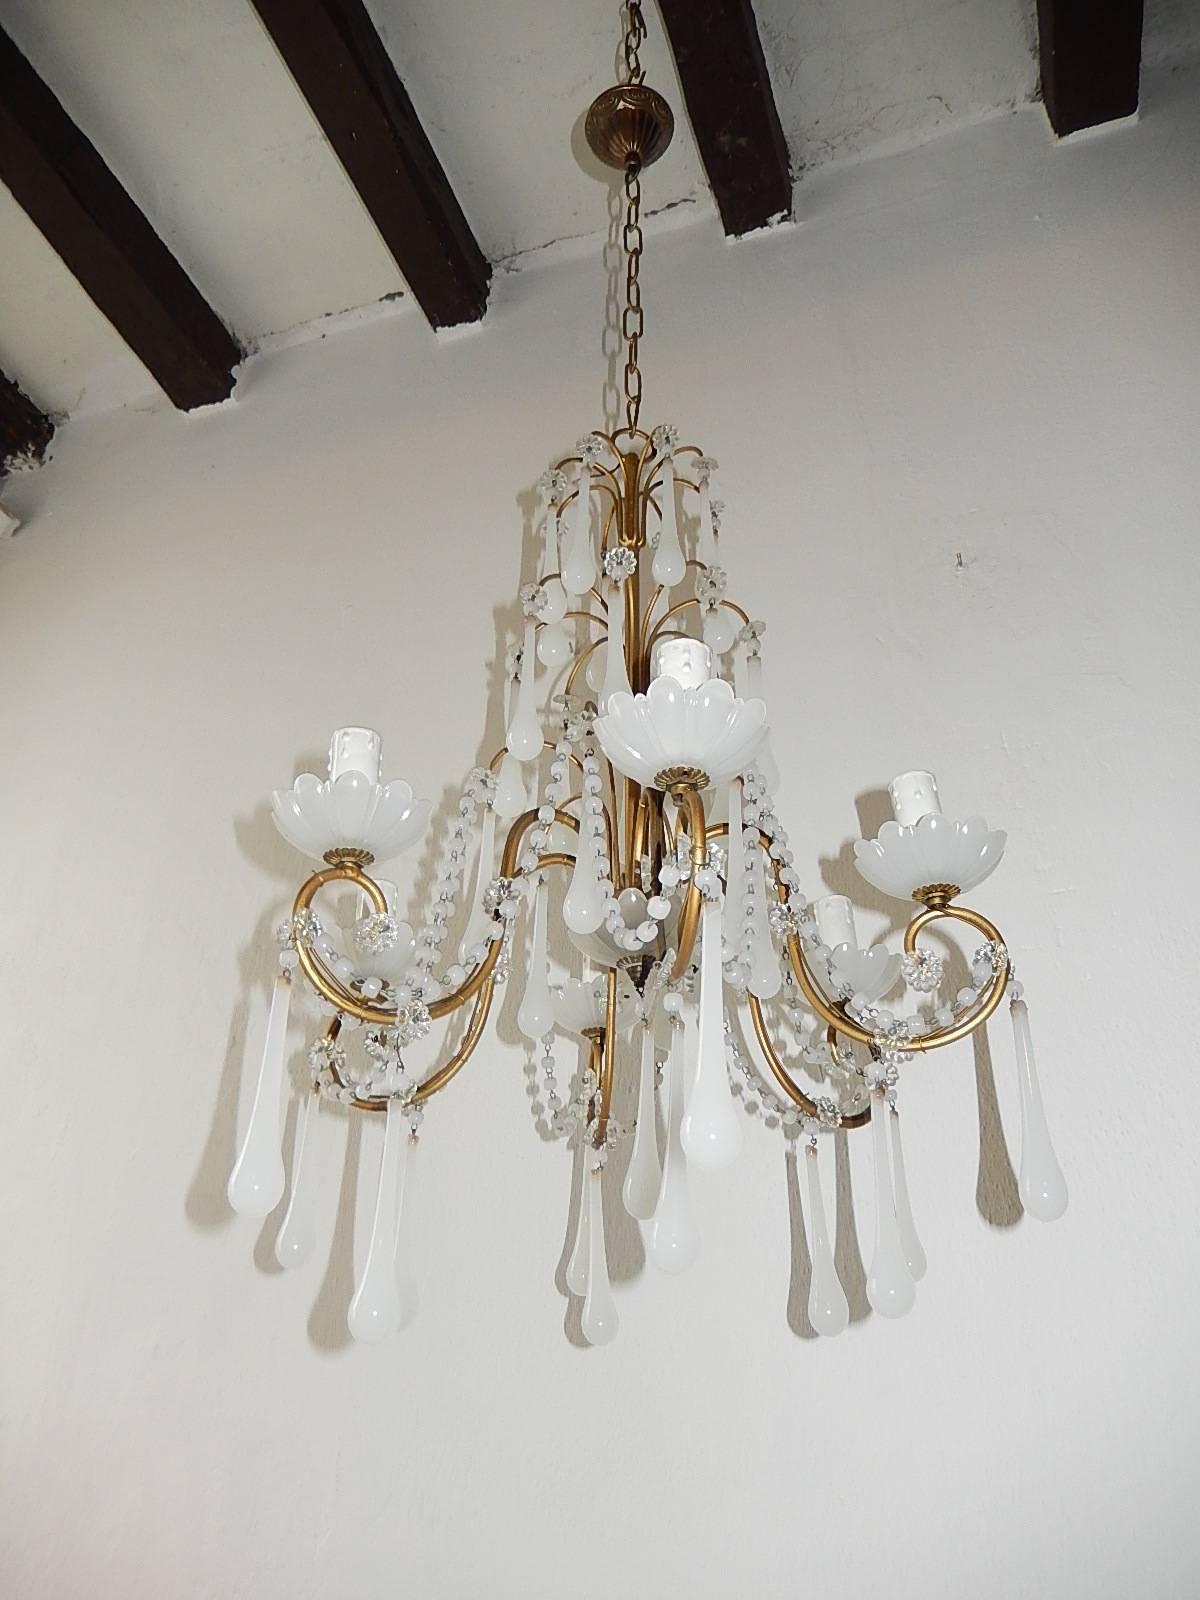 Housing six lights sitting in white opaline bobeches, also one on bottom. Rewired and ready to hang. Gilt metal. Murano white opaline drops and beads. Adding another 16 inches of original chain and canopy. Free priority shipping from Italy.